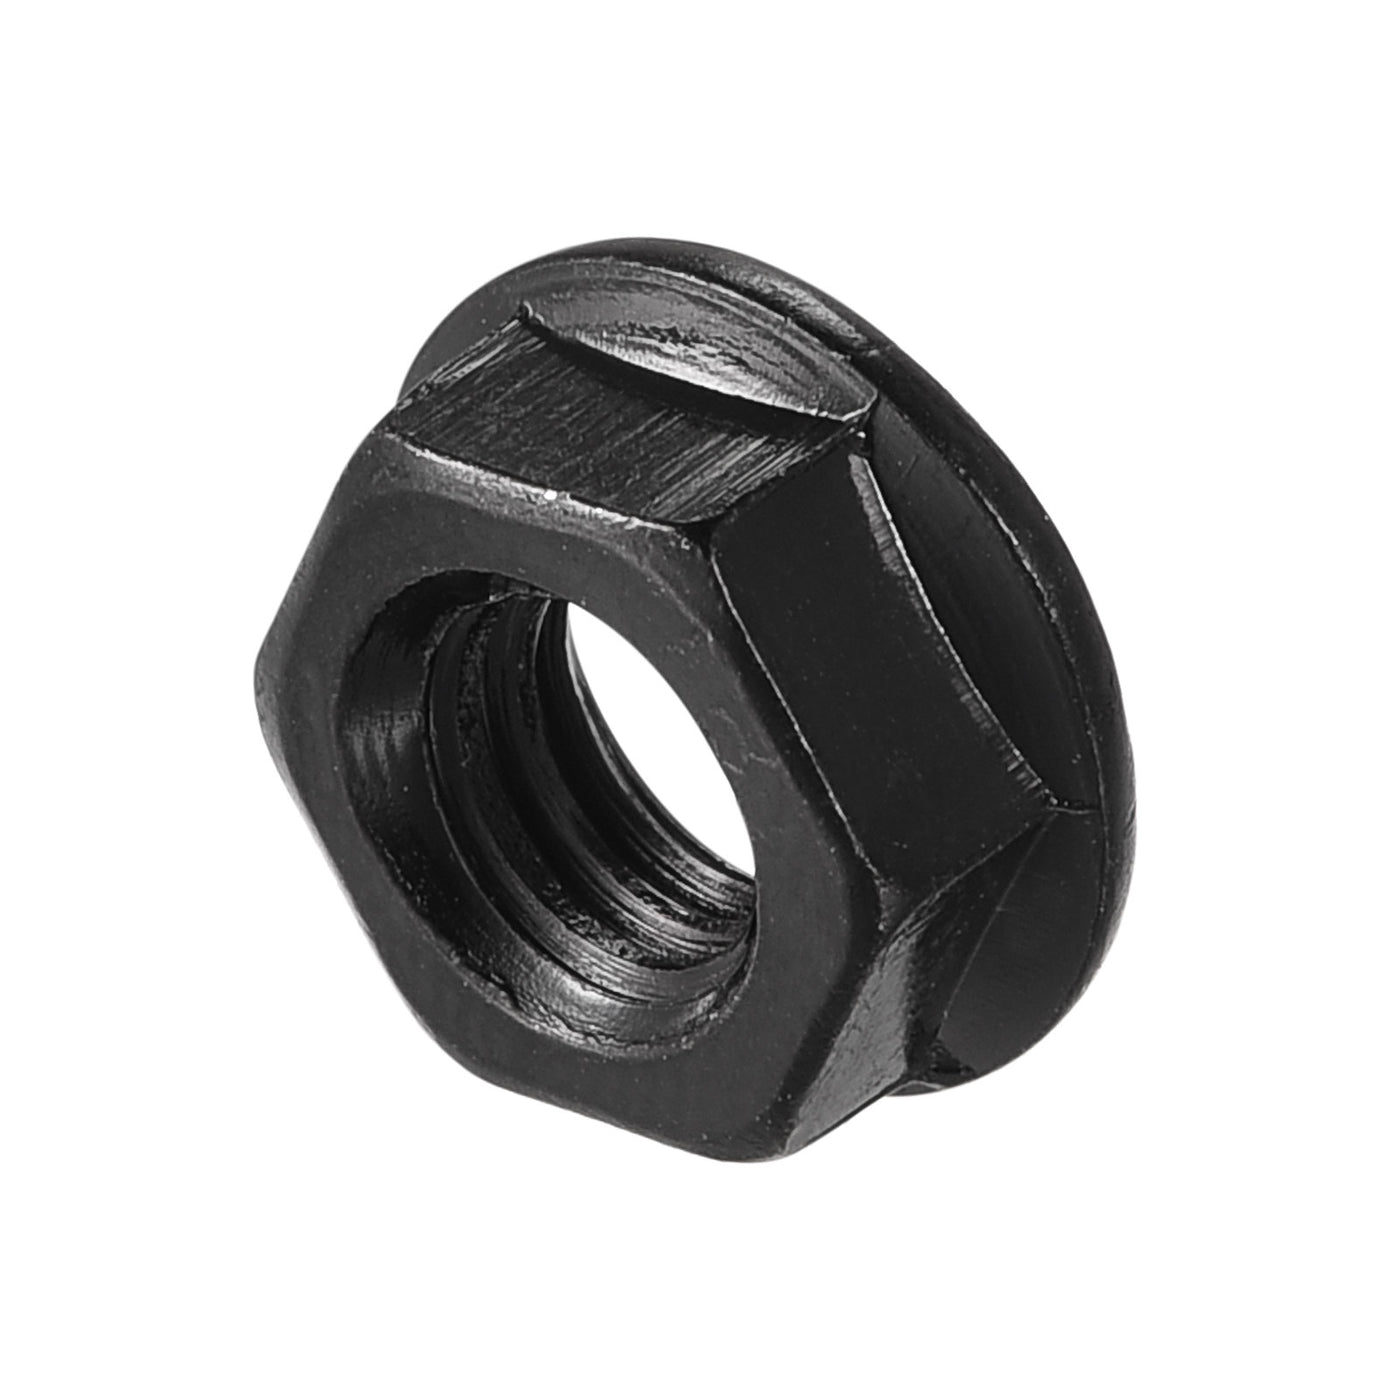 uxcell Uxcell Serrated Flange Hex Lock Nuts, Carbon Steel Black Oxide Finished Self-locking